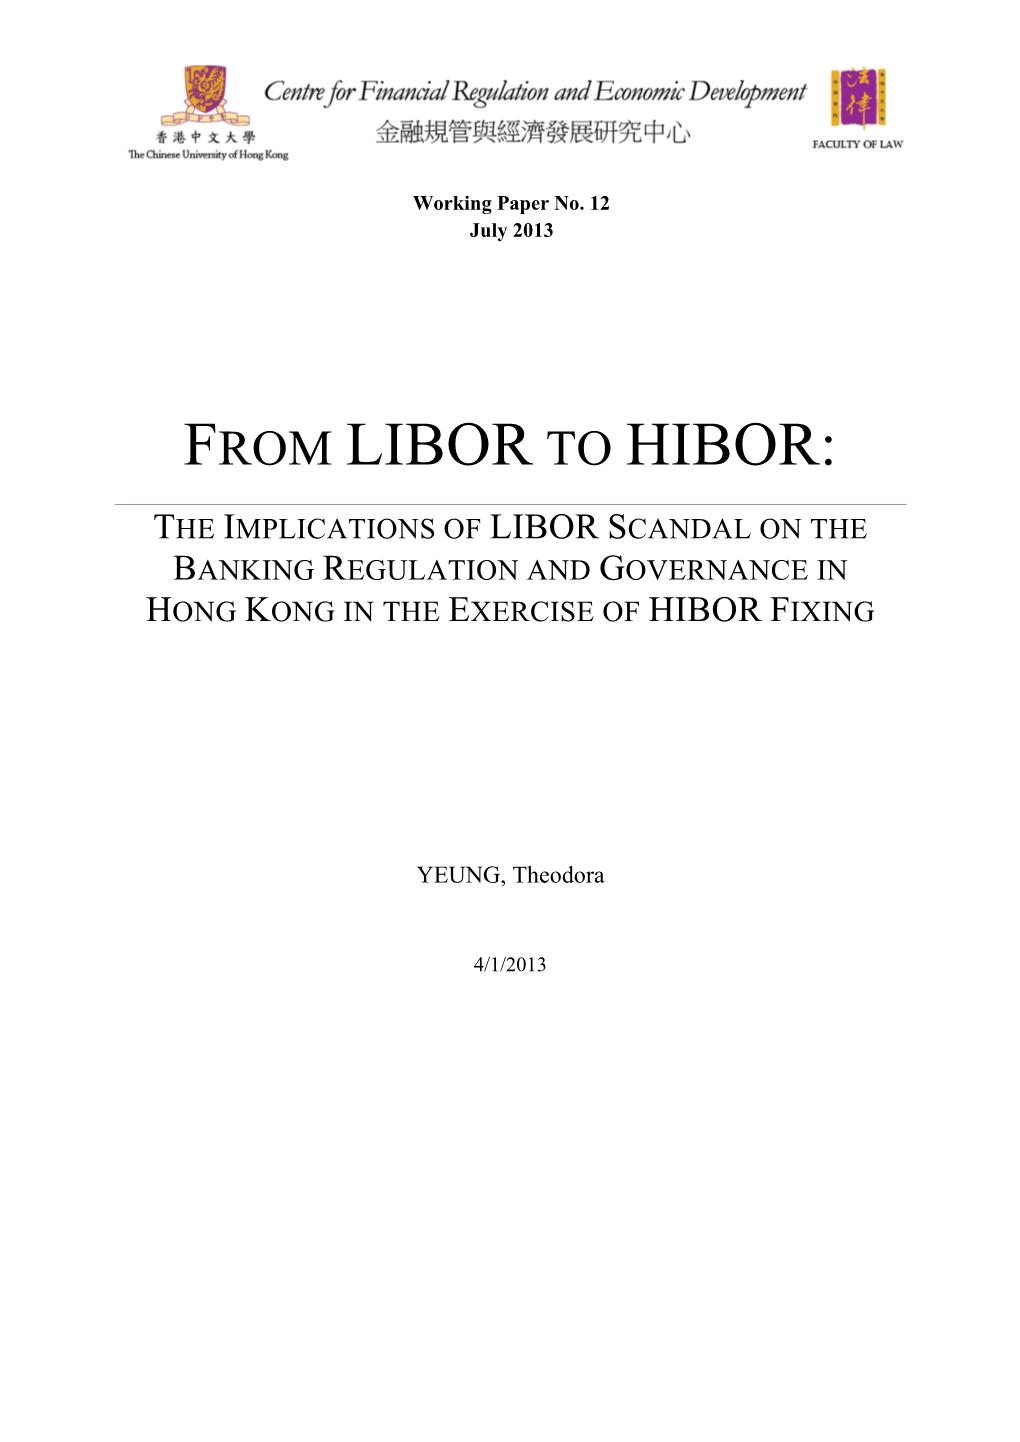 From Libor to Hibor